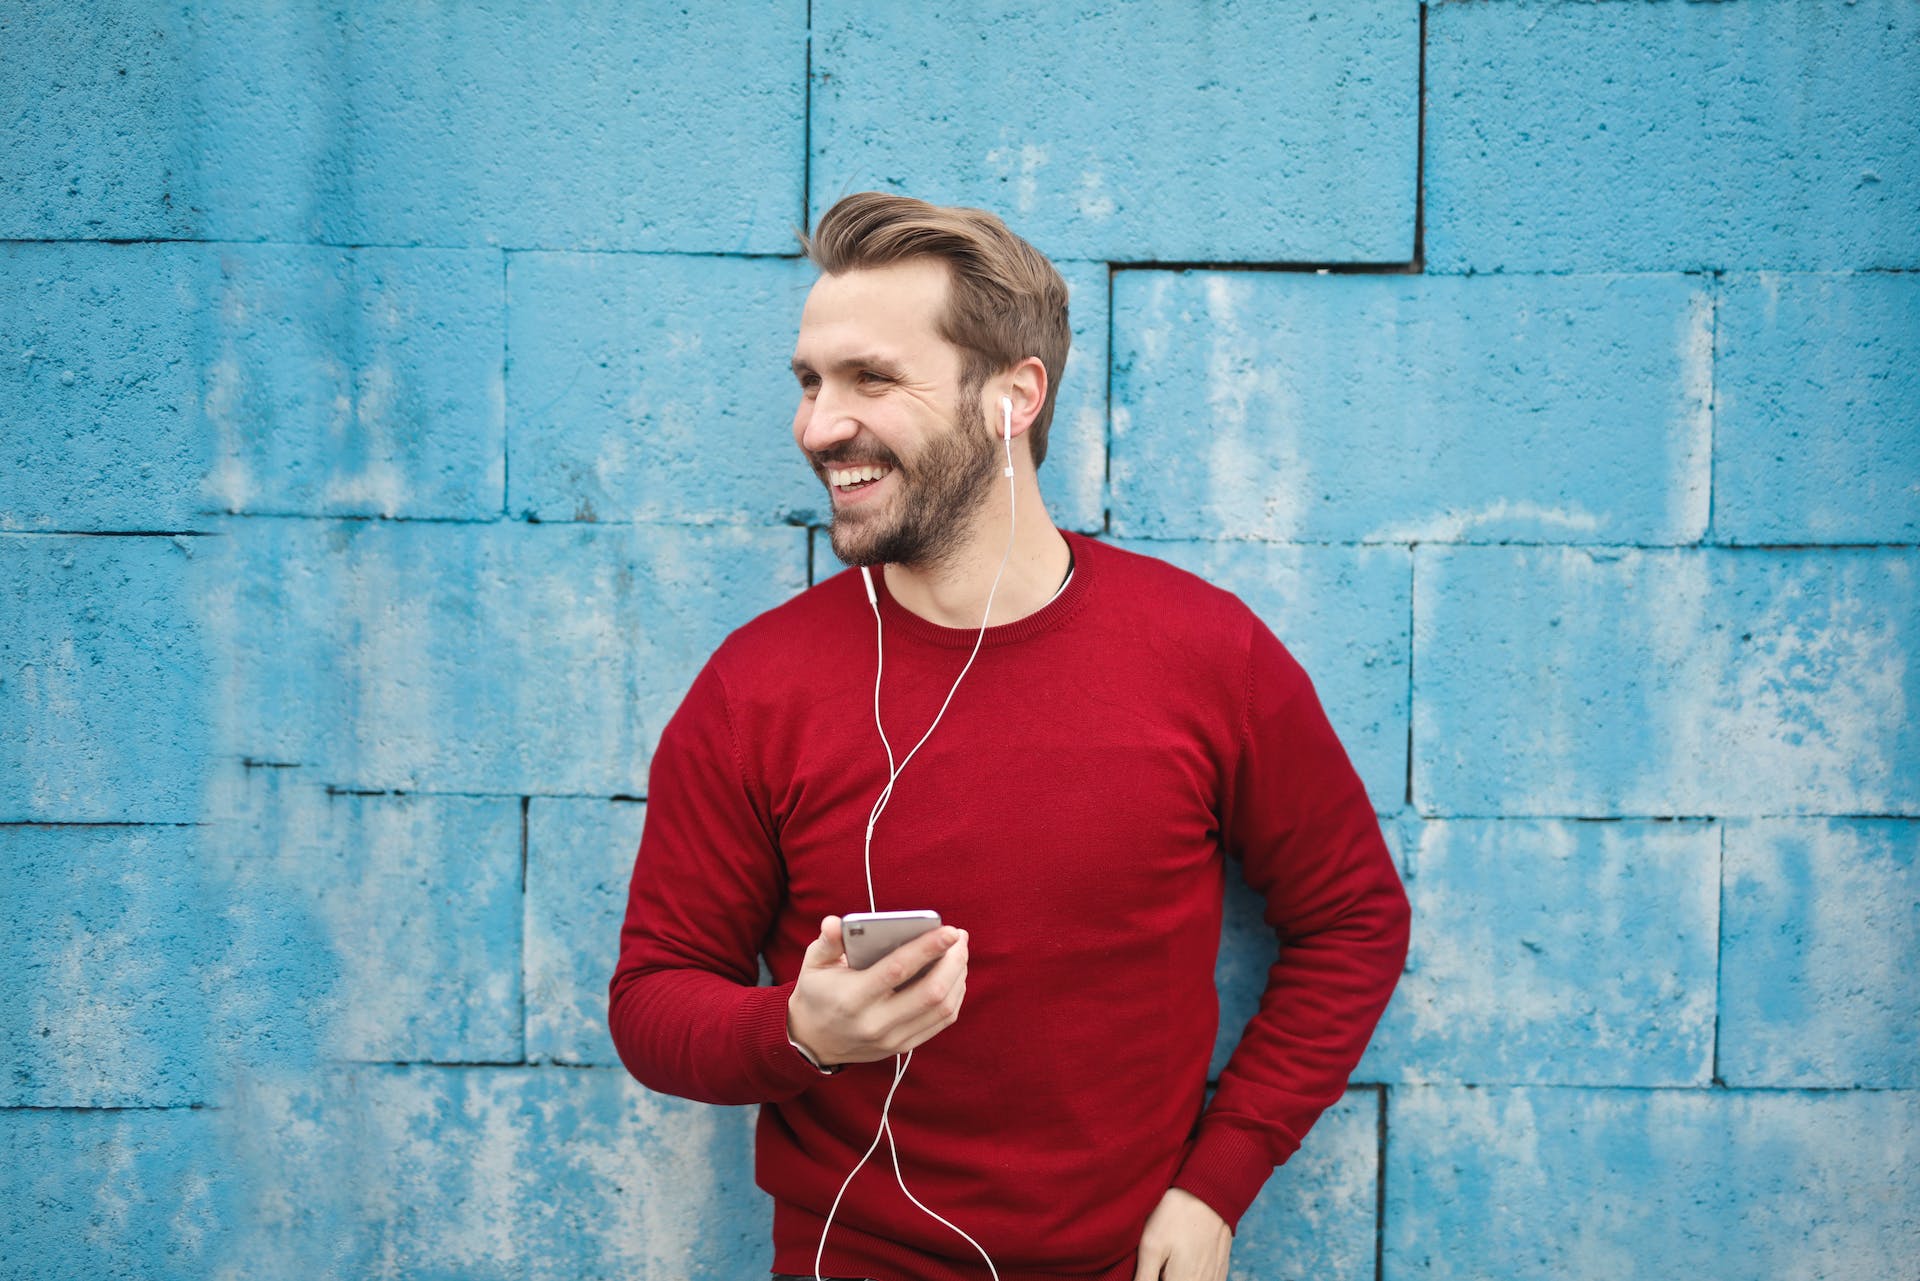 A man listening to music on his phone | Source: Pexels